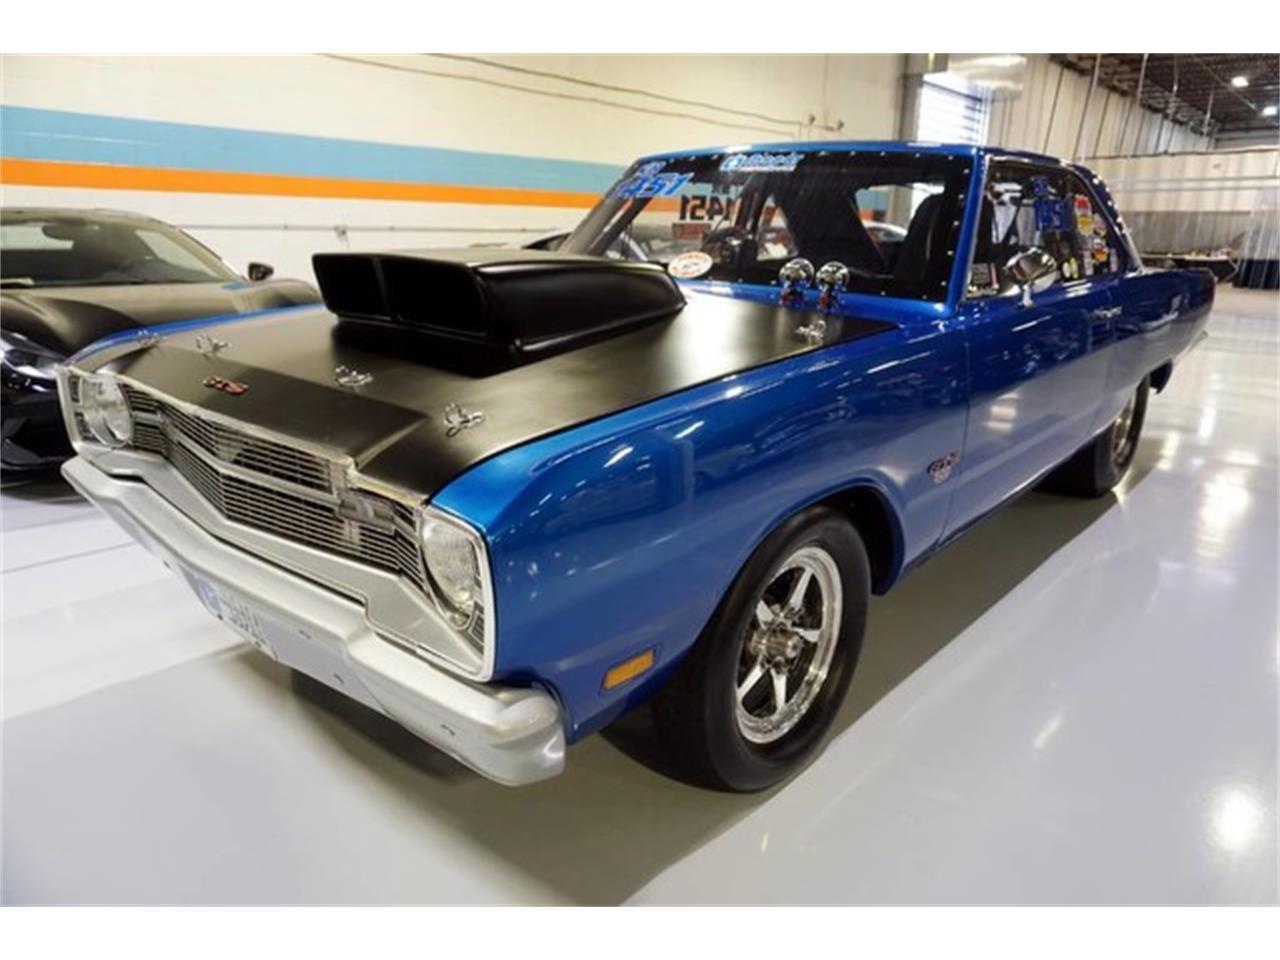 drag cars for sale